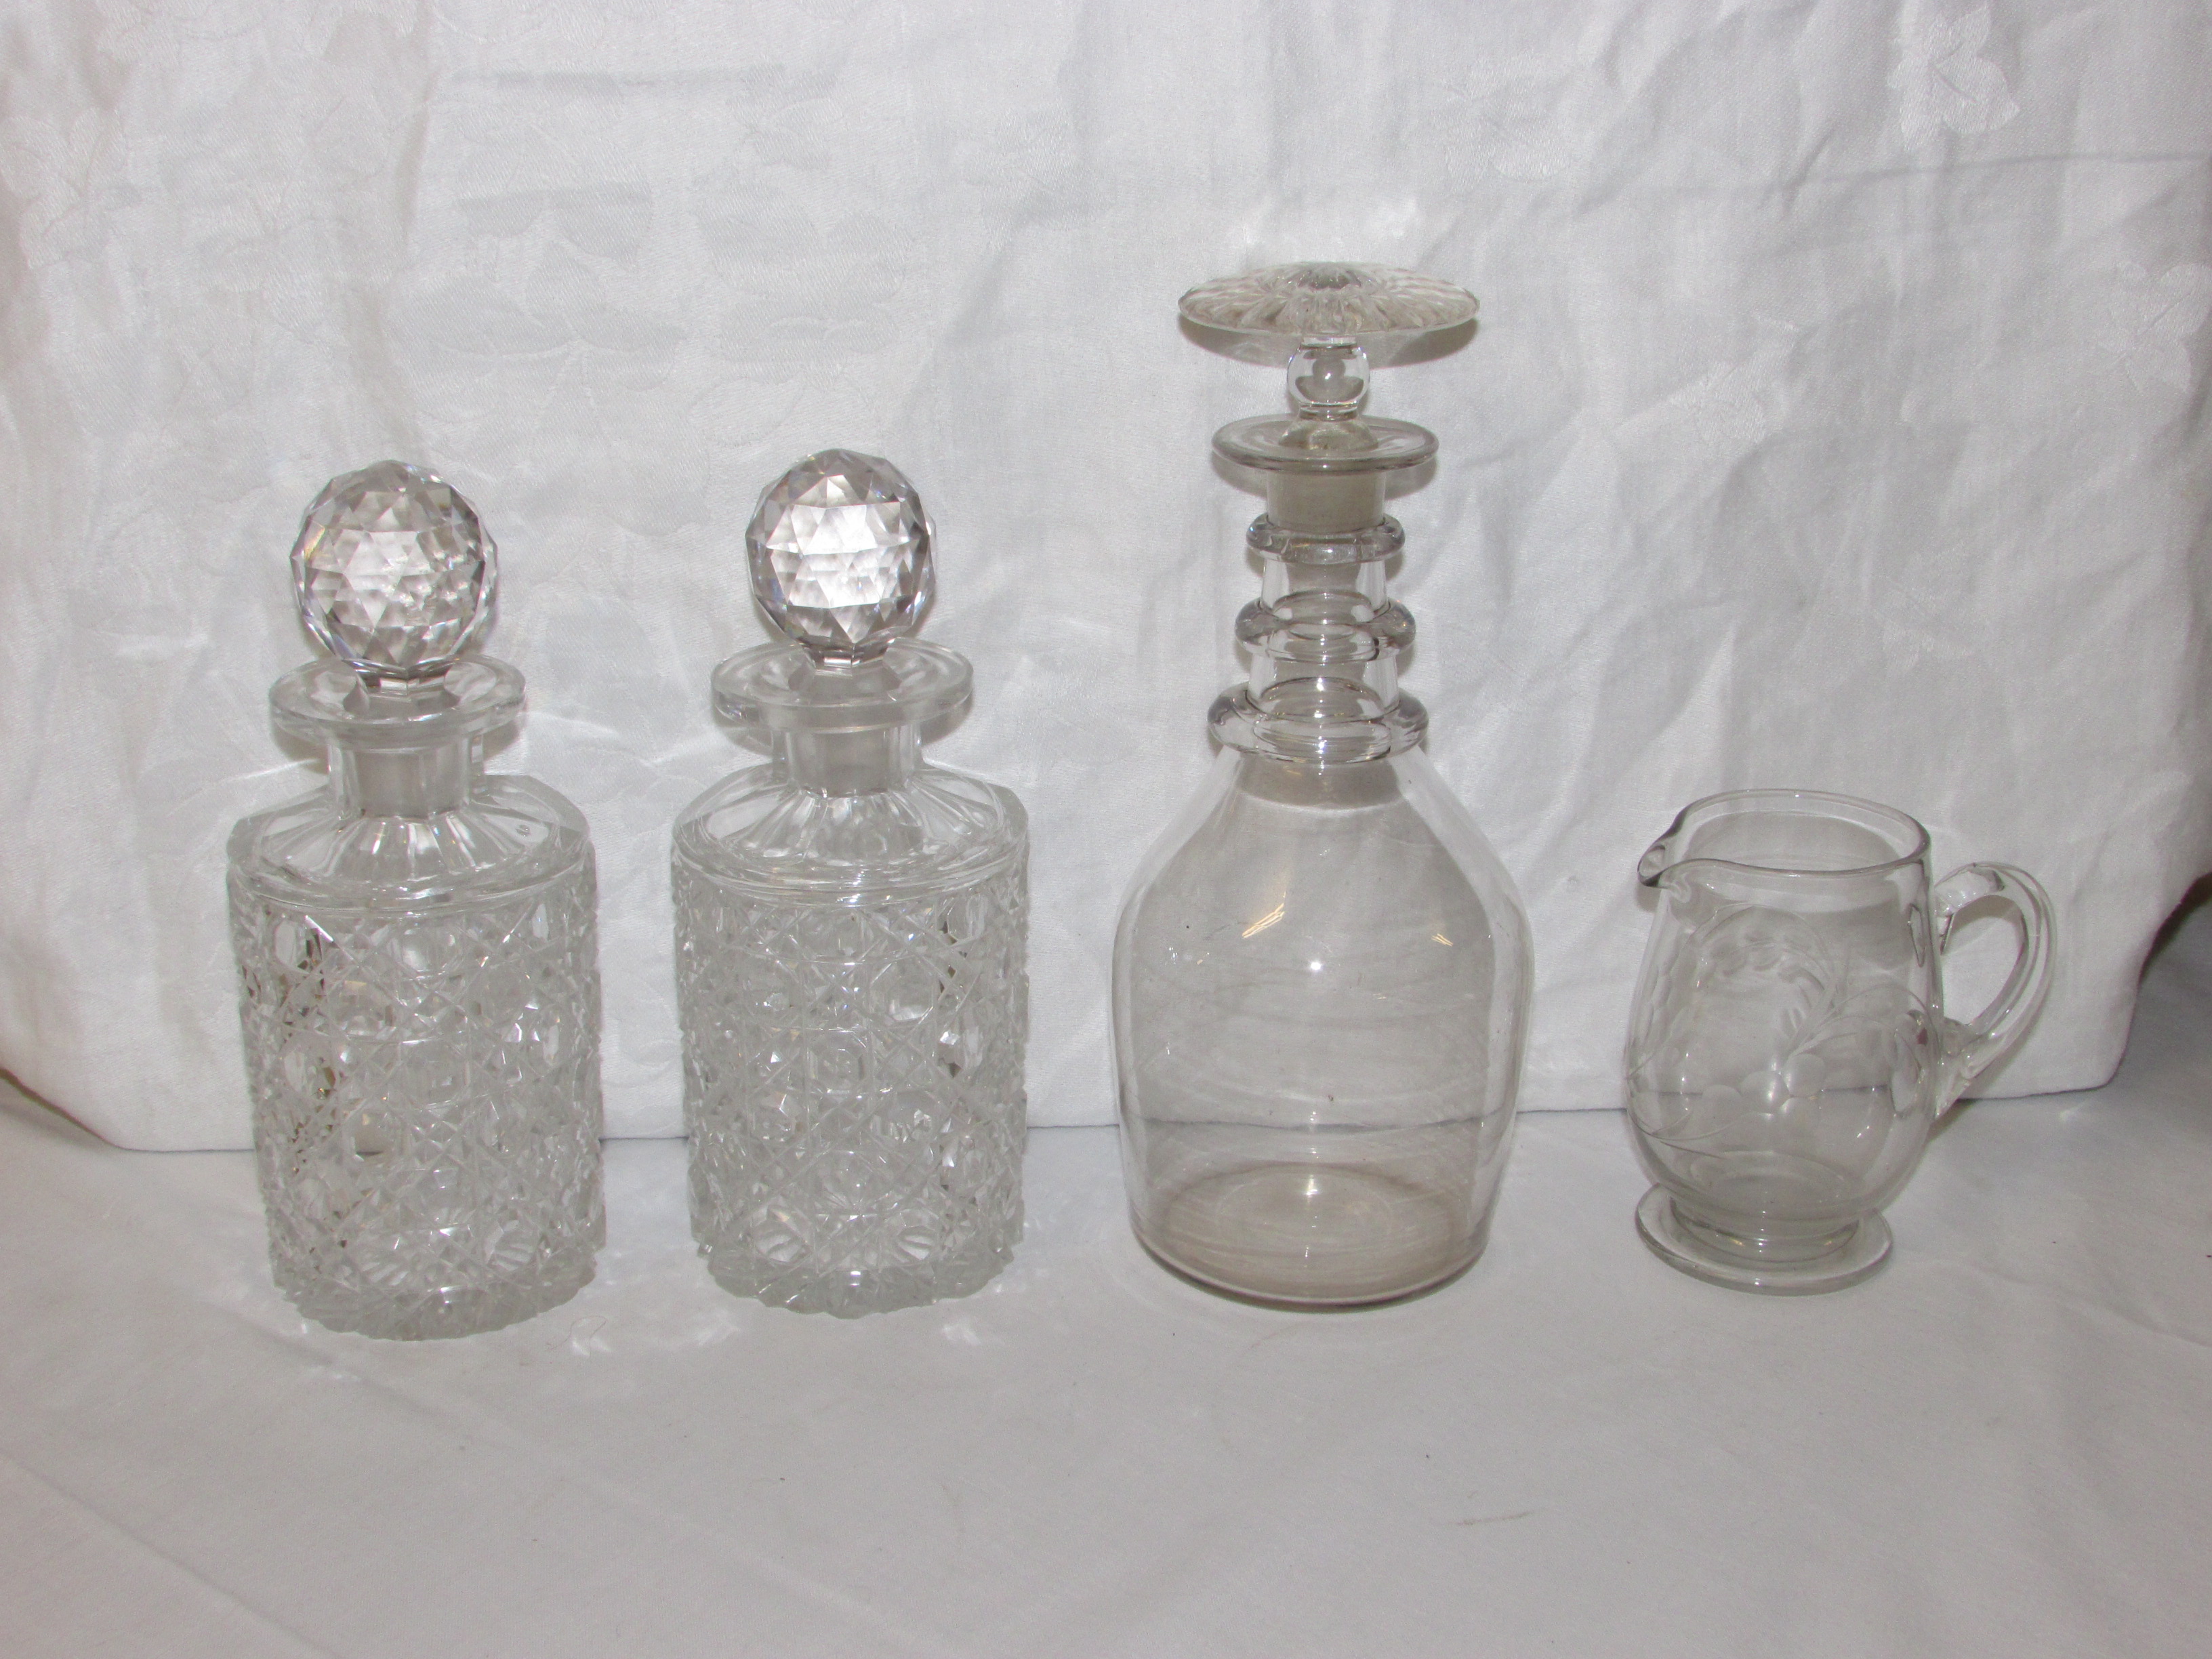 Two heavily cut glass spirit decanters and stoppers, engraved glass milk jug and wine decanter